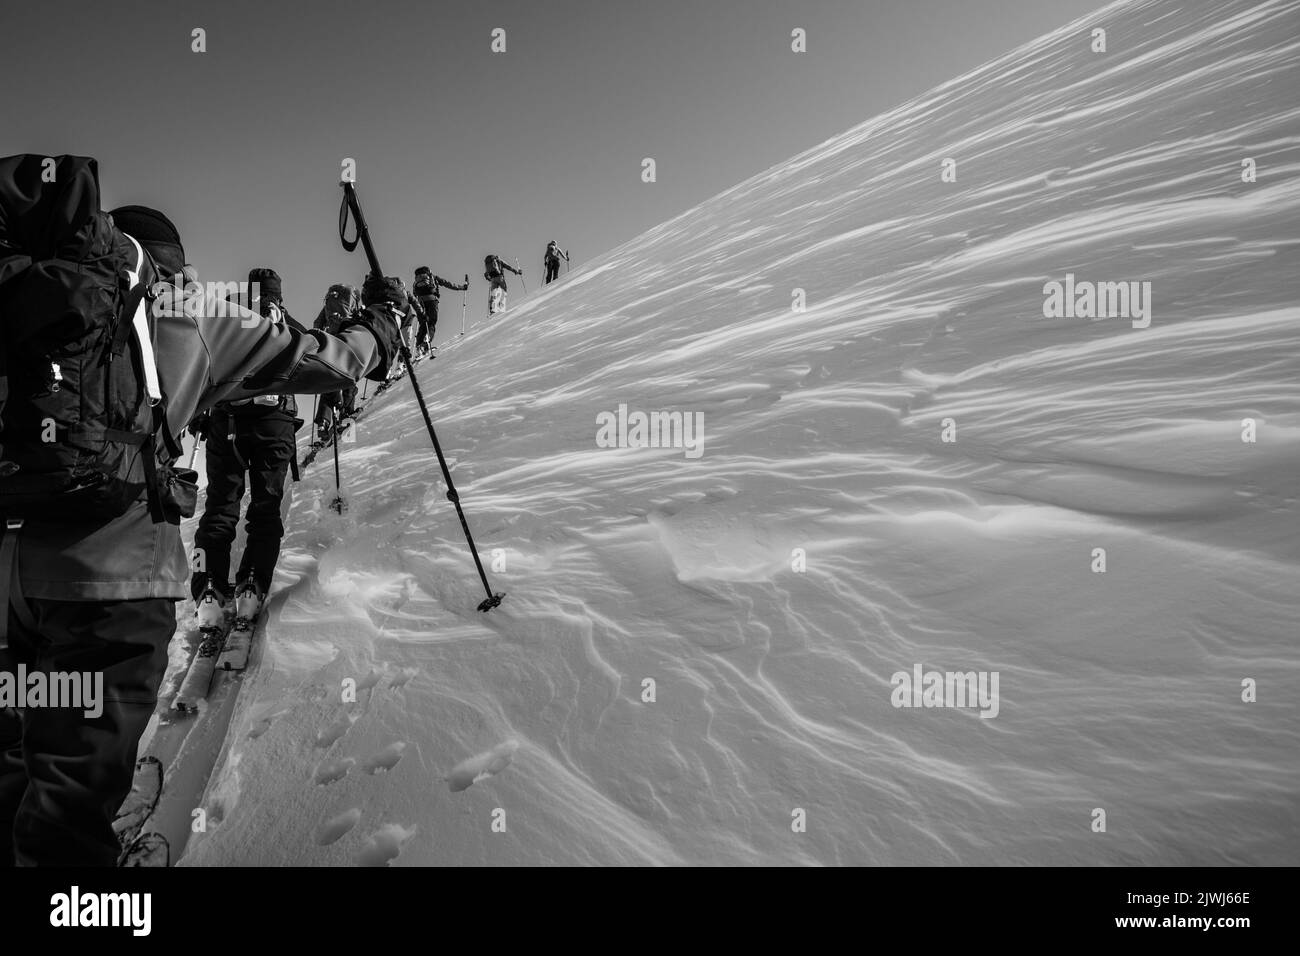 Group on skis climbing snowy mountain in a row Stock Photo